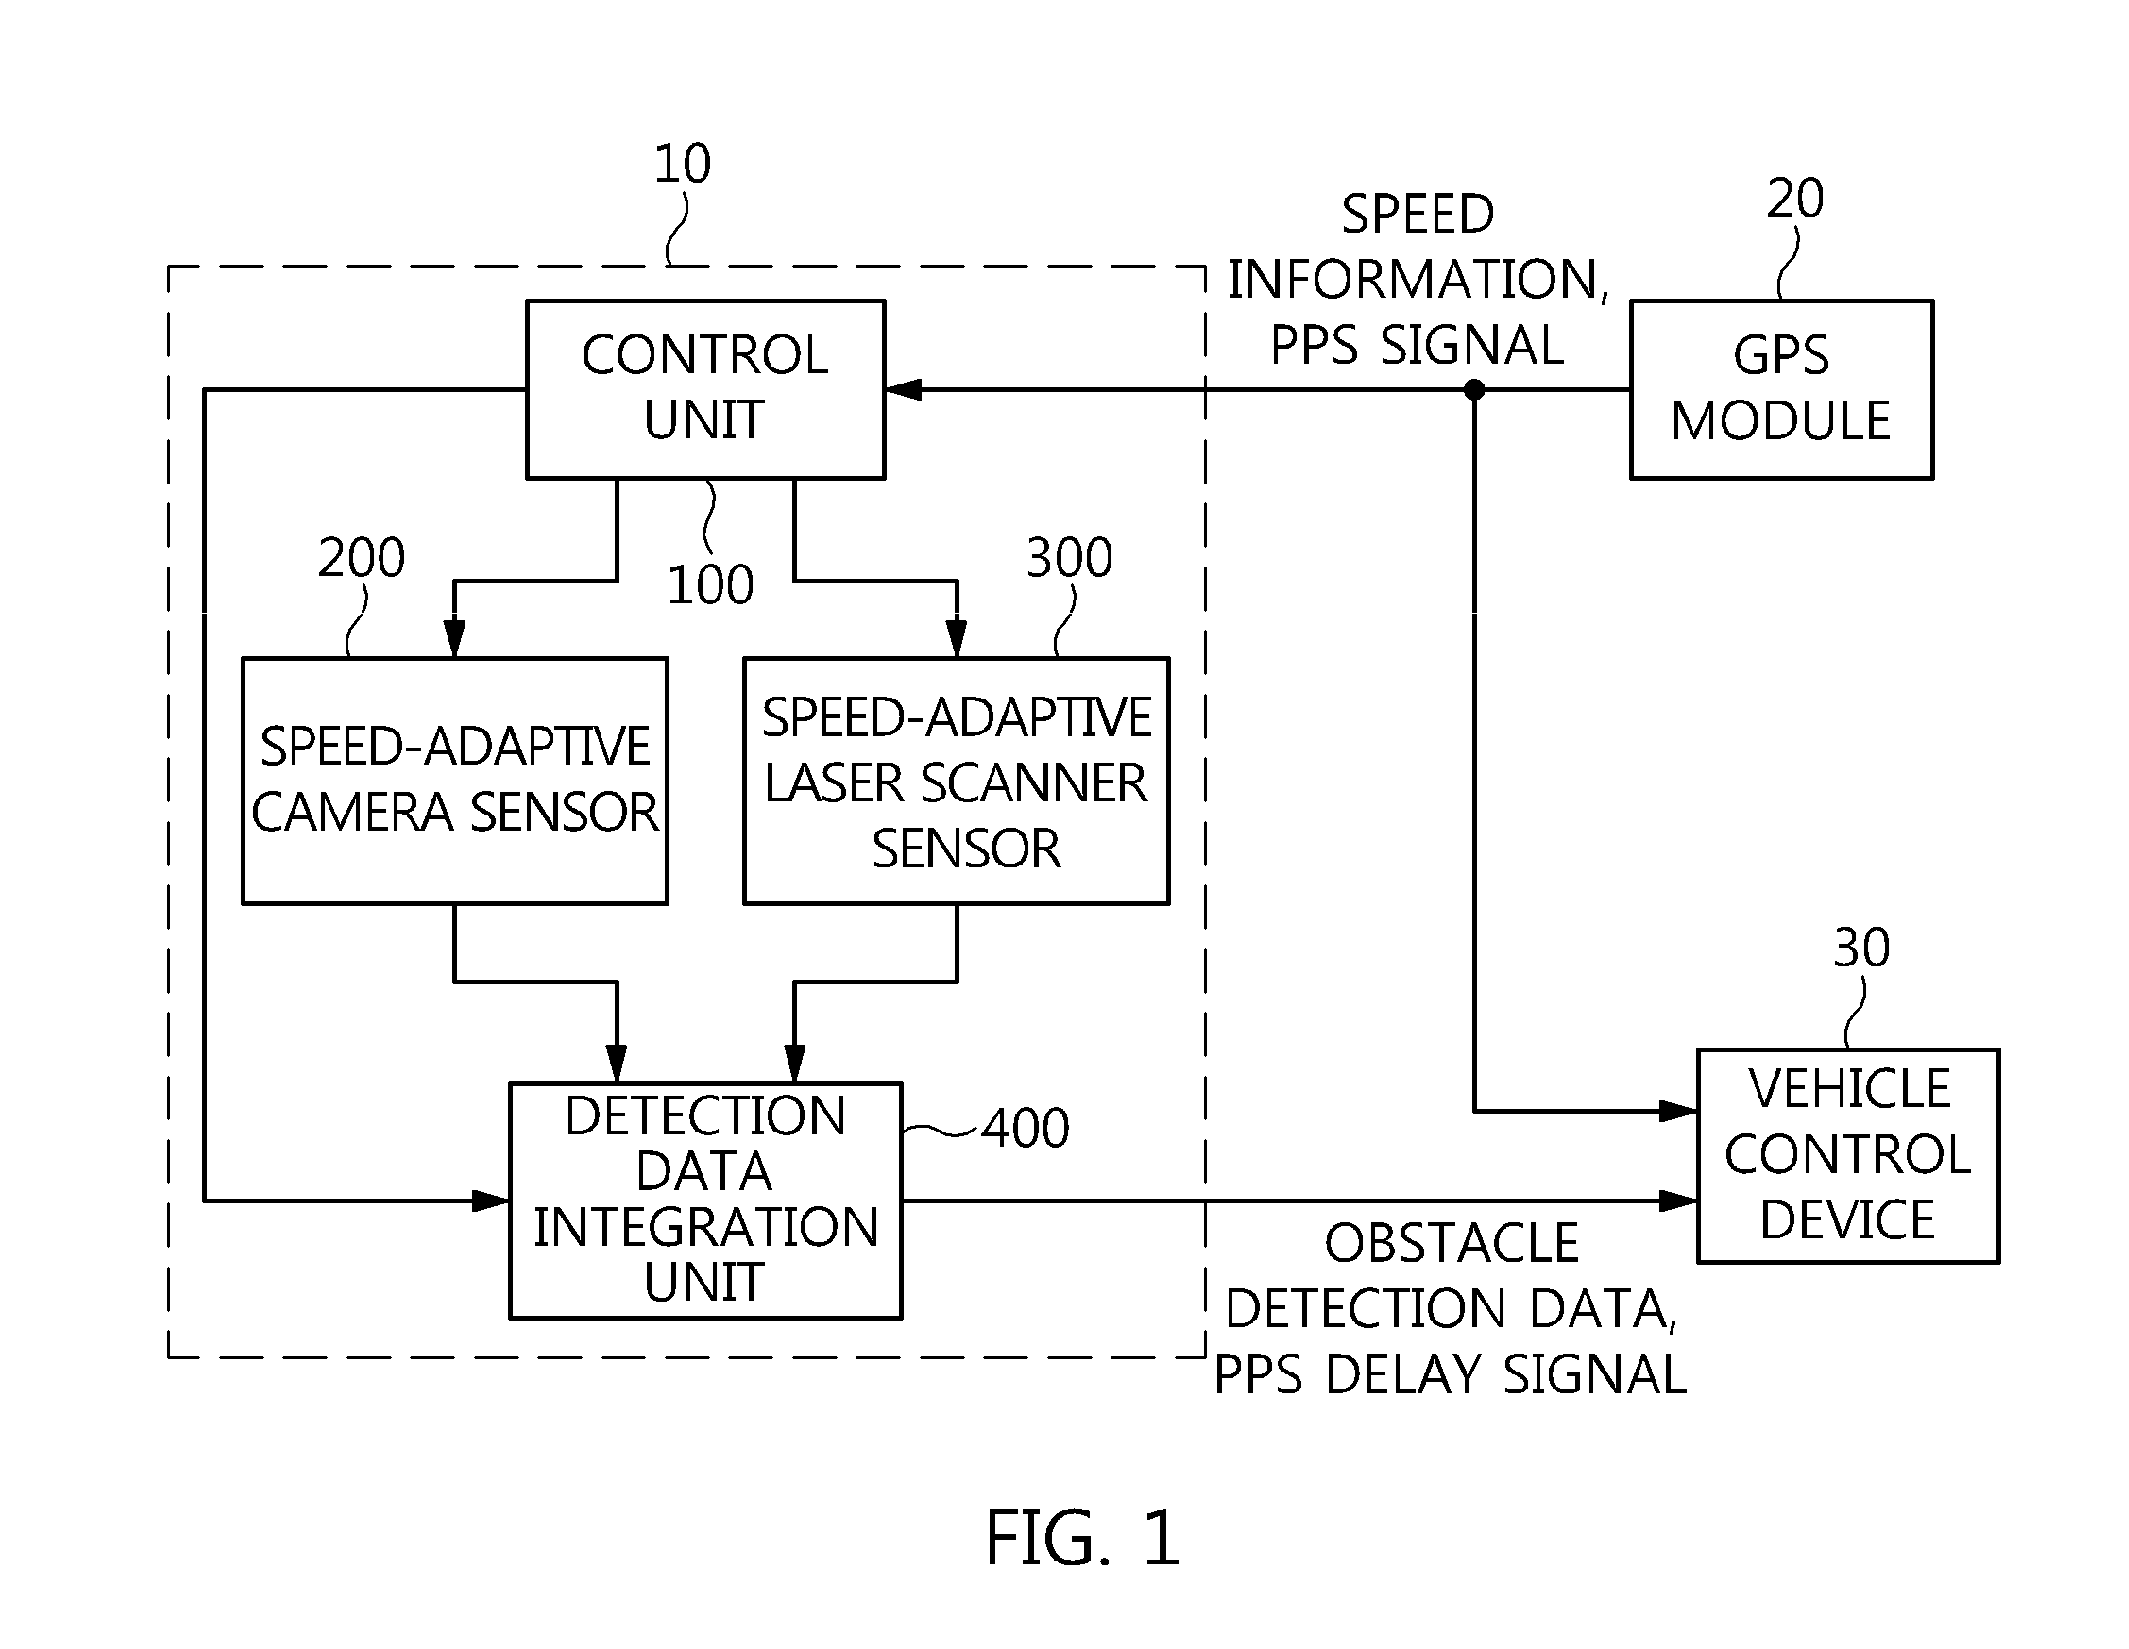 Apparatus and method for detecting obstacle adaptively to vehicle speed